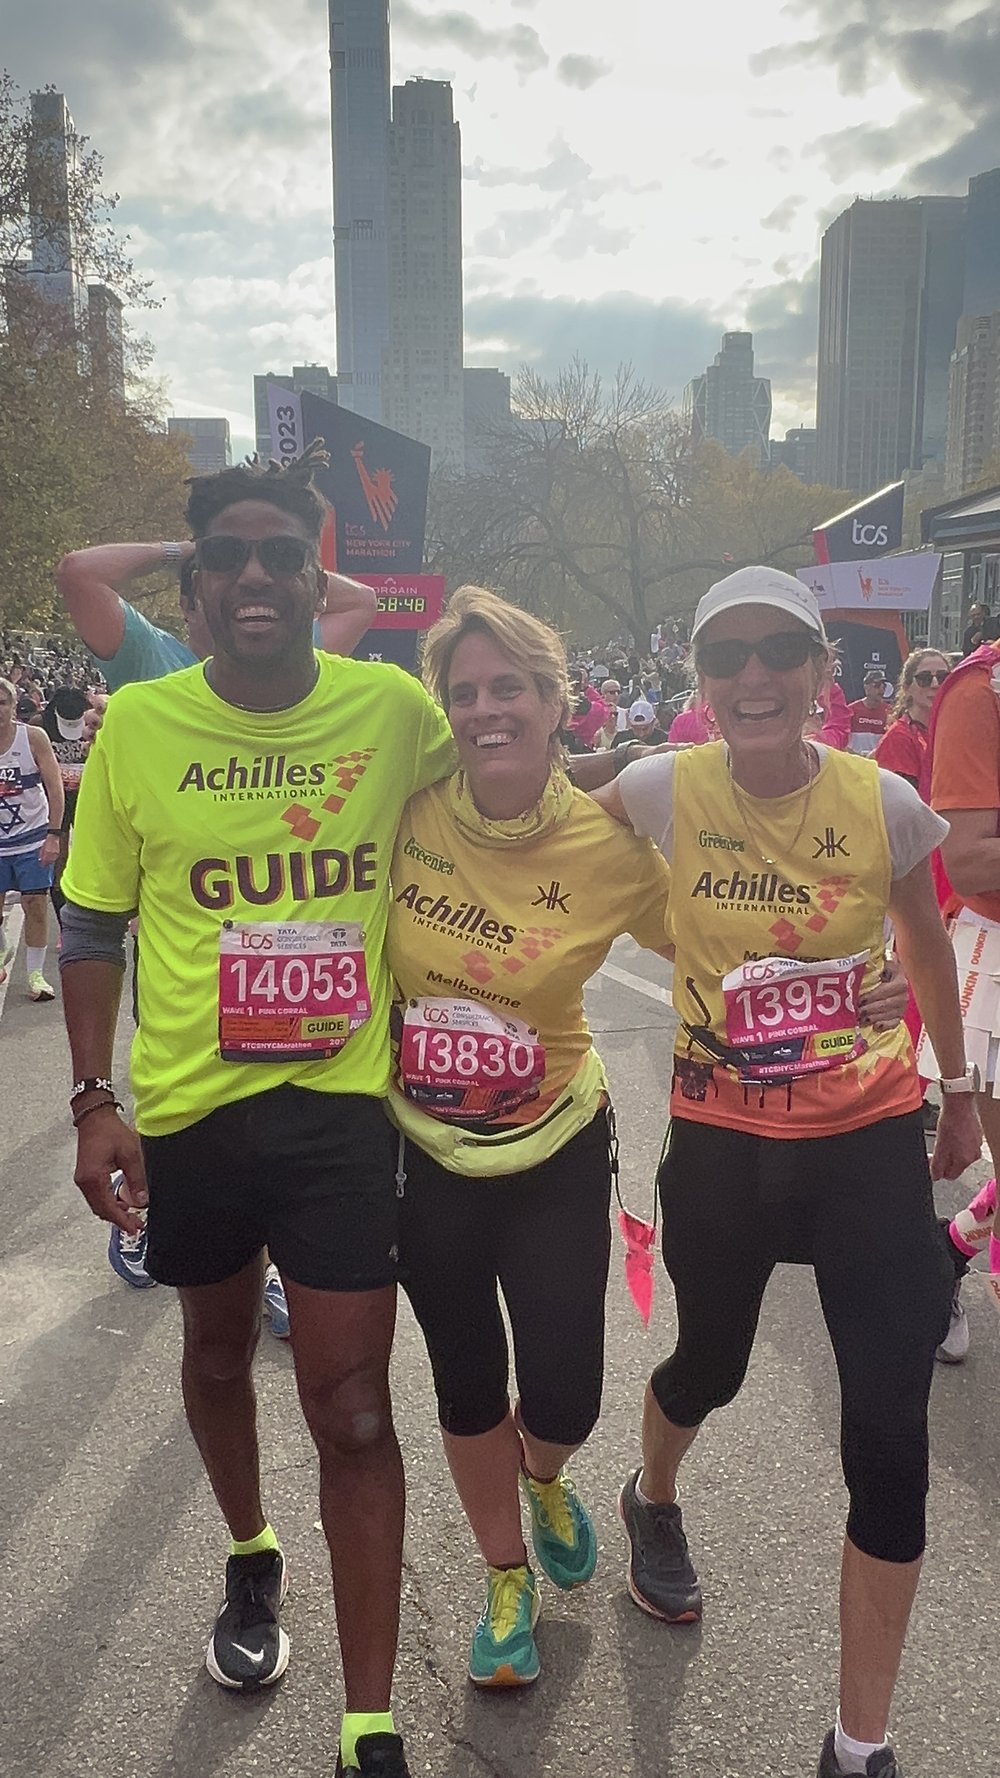  Claudia Stevenson posing with Knox Robinson and her other Achilles Melbourne guide after they crossed the finish line  